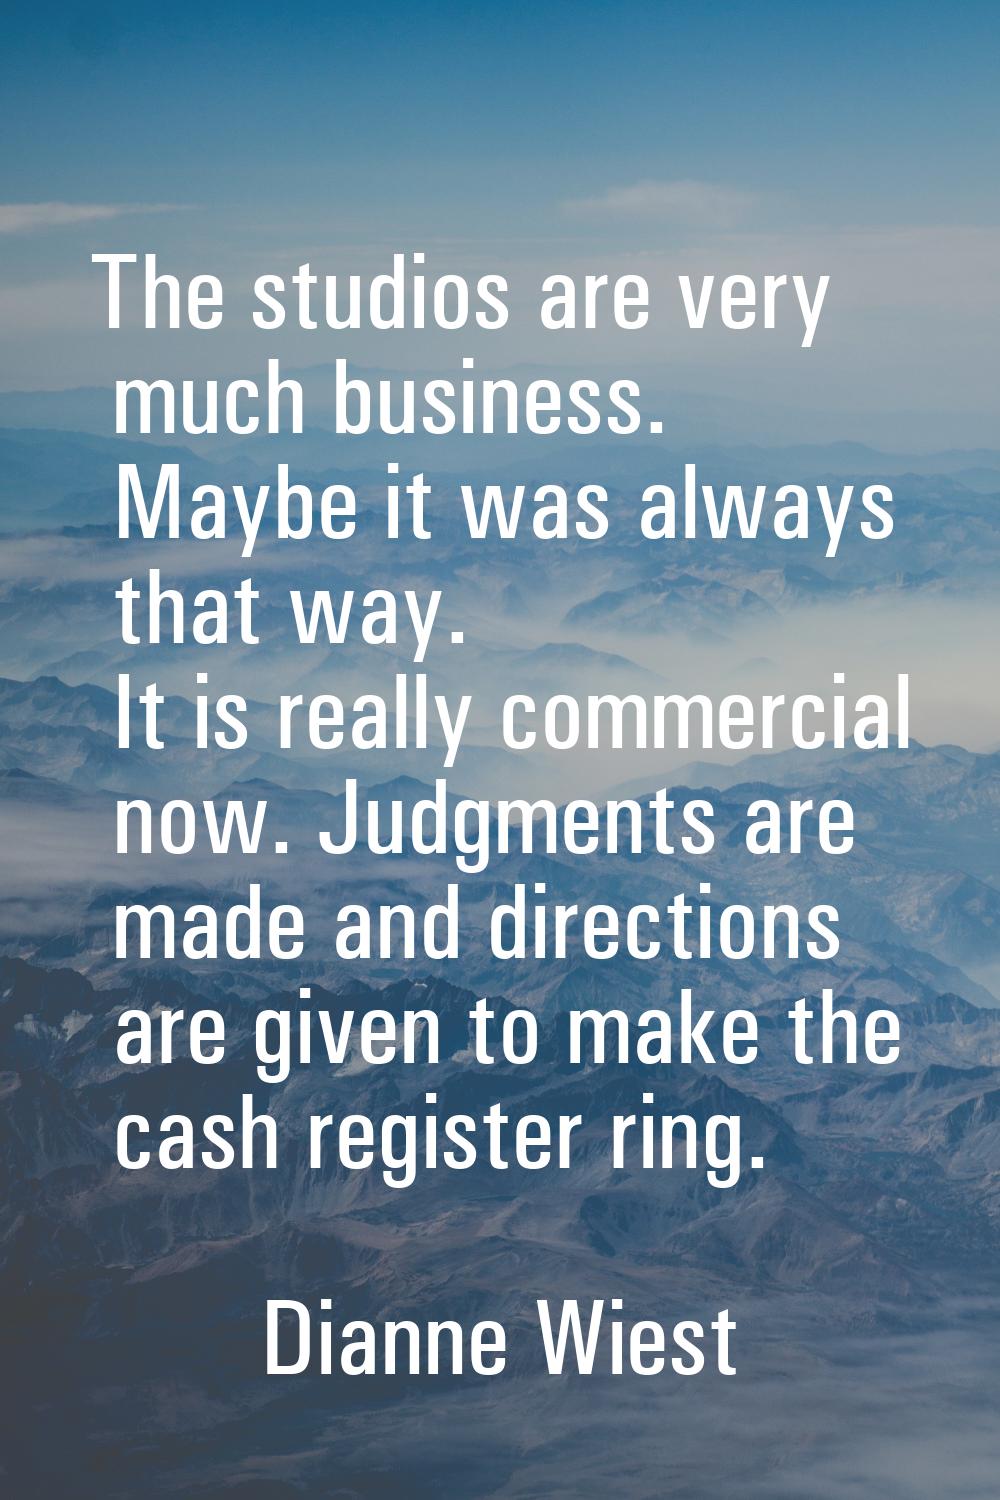 The studios are very much business. Maybe it was always that way. It is really commercial now. Judg